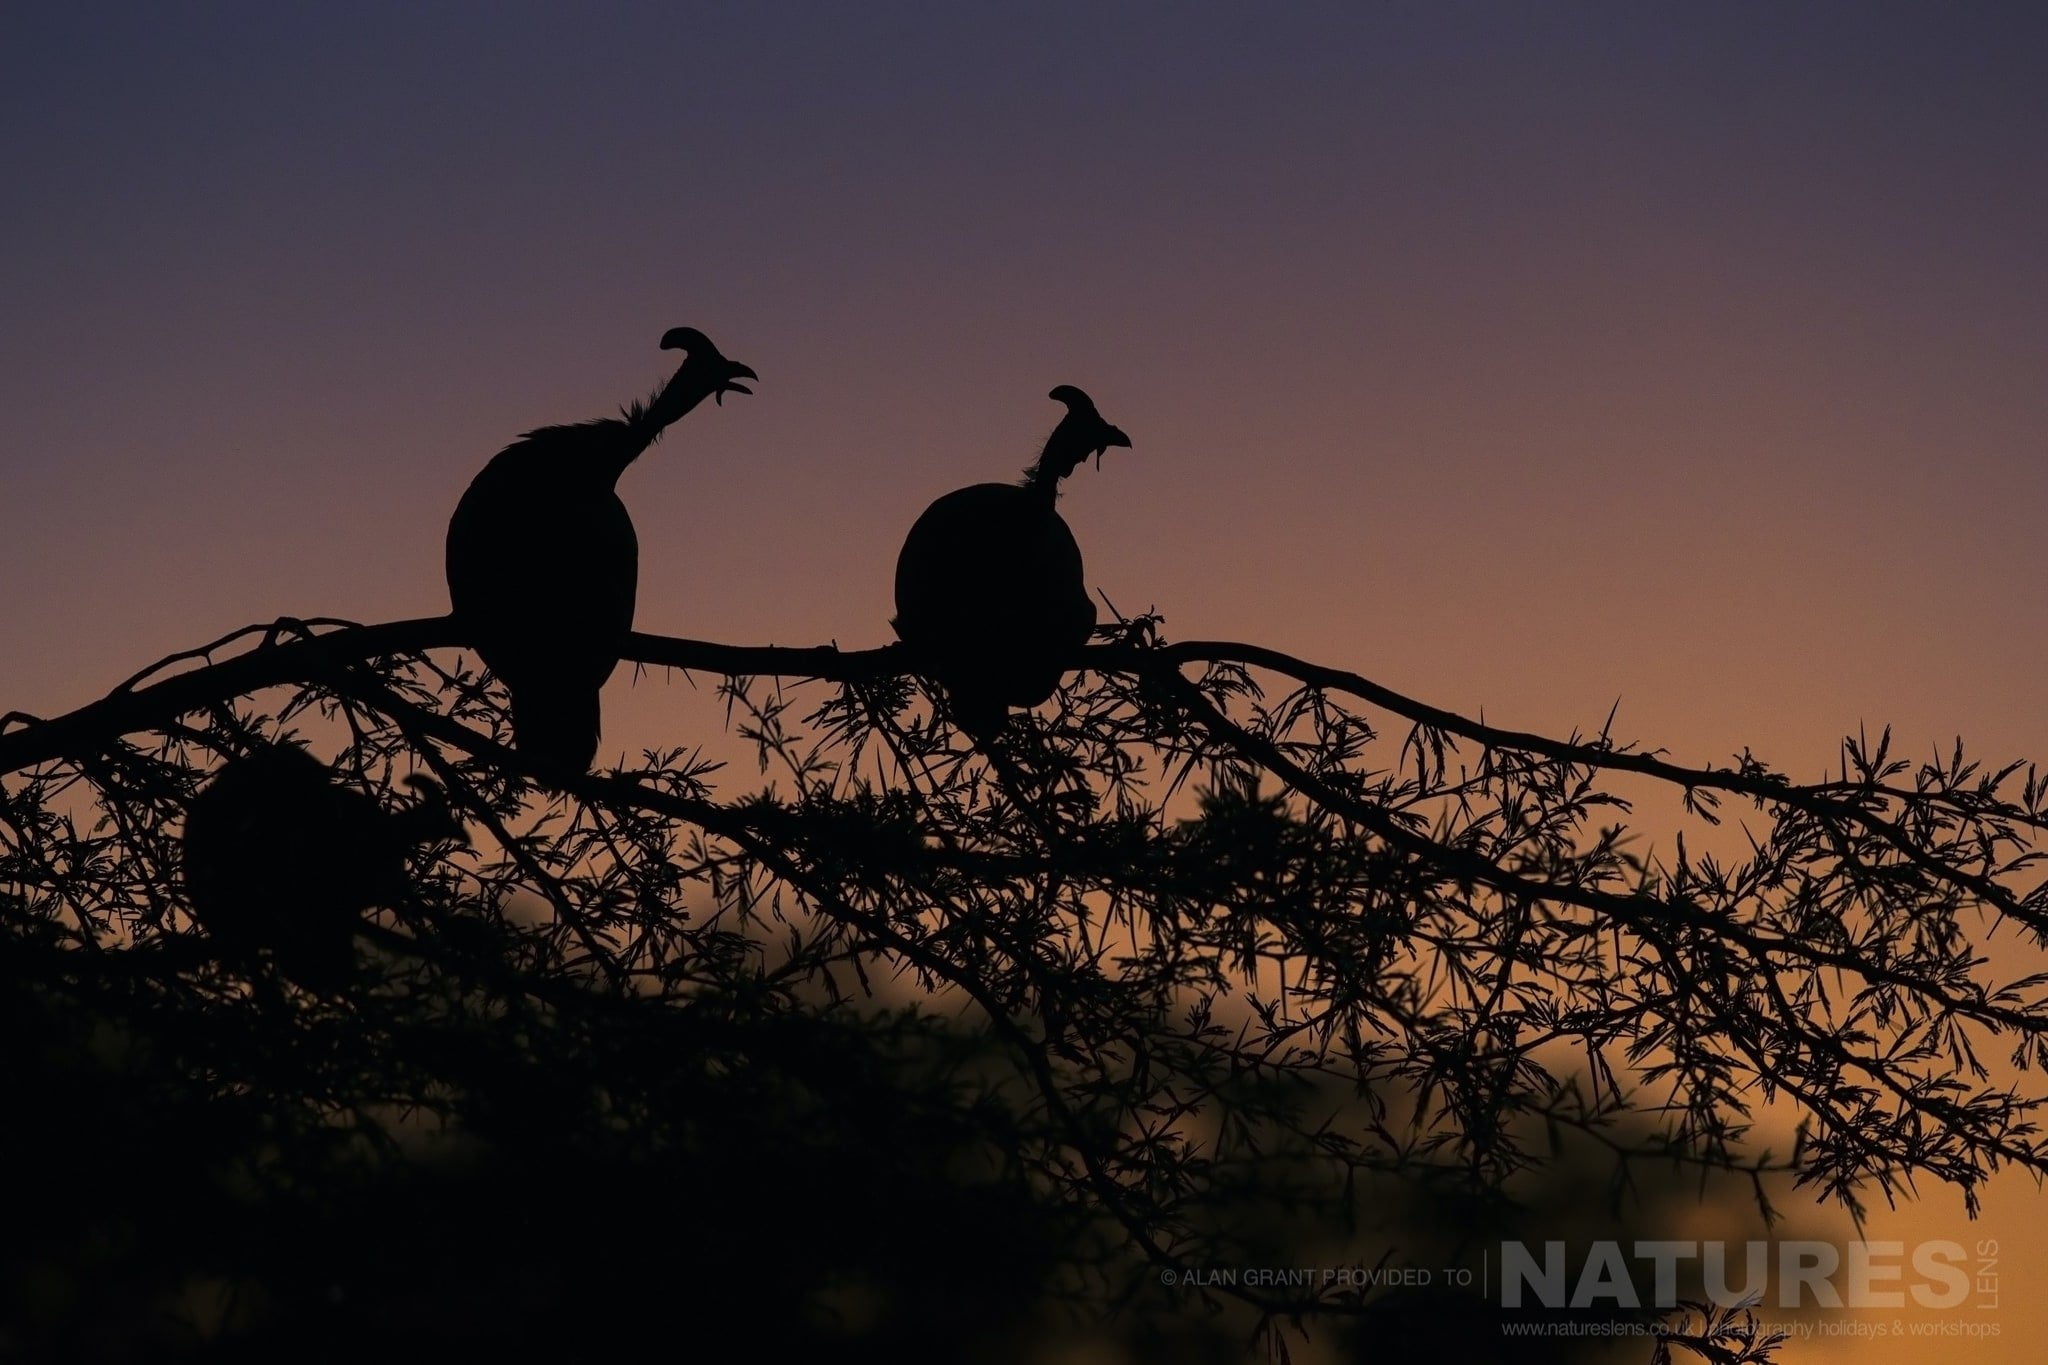 A Colourful Silhouette Of Two Guinea Fowl Captured During The Natureslens Zimanga Photography Safari